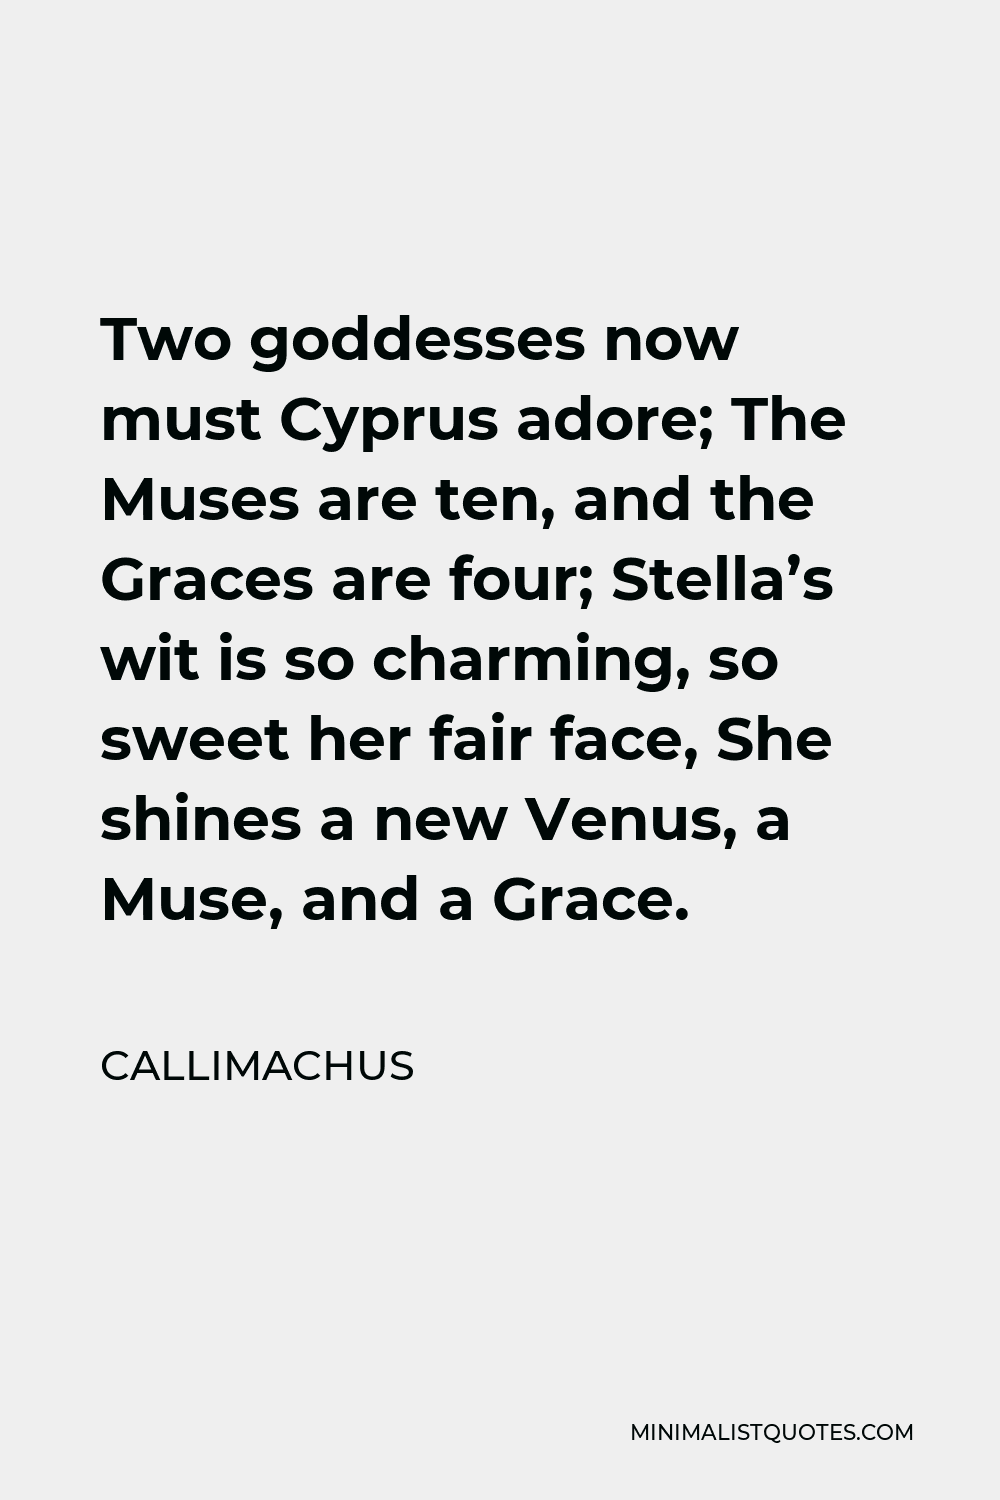 Callimachus Quote - Two goddesses now must Cyprus adore; The Muses are ten, and the Graces are four; Stella’s wit is so charming, so sweet her fair face, She shines a new Venus, a Muse, and a Grace.